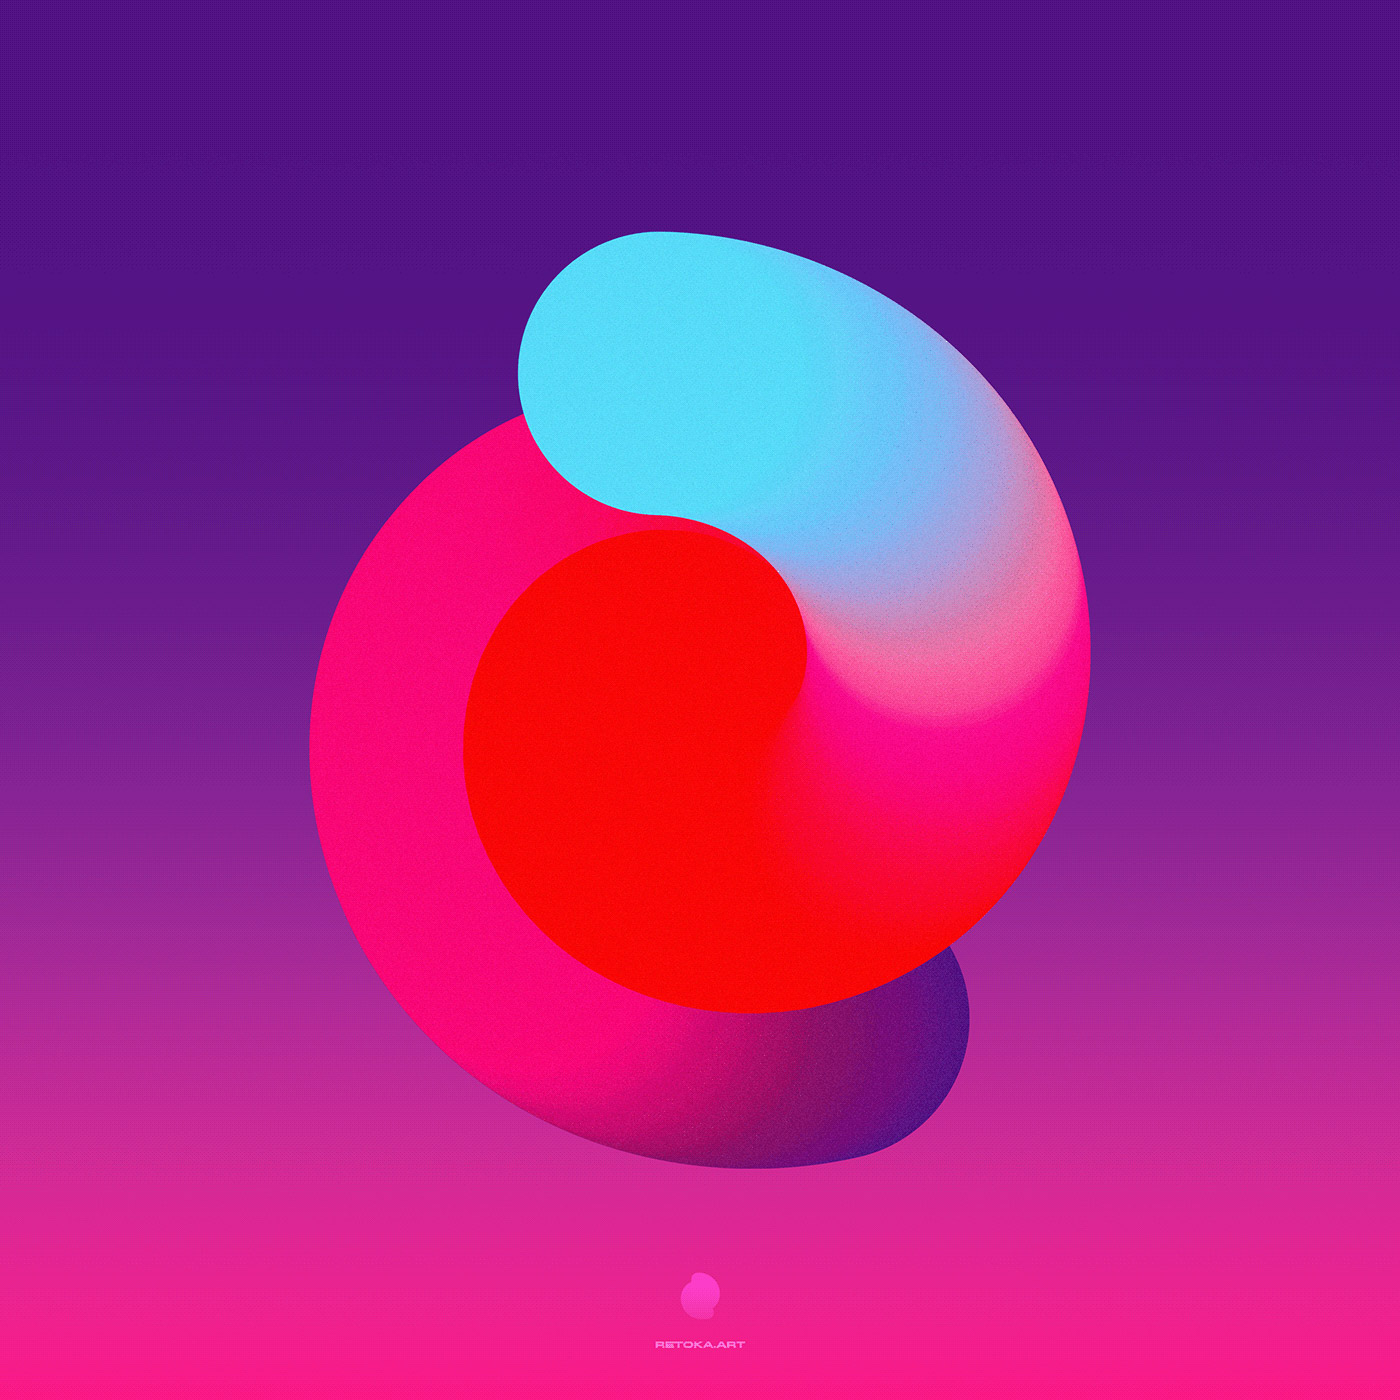 An exercise of shapes, colors and gradients by Retoka